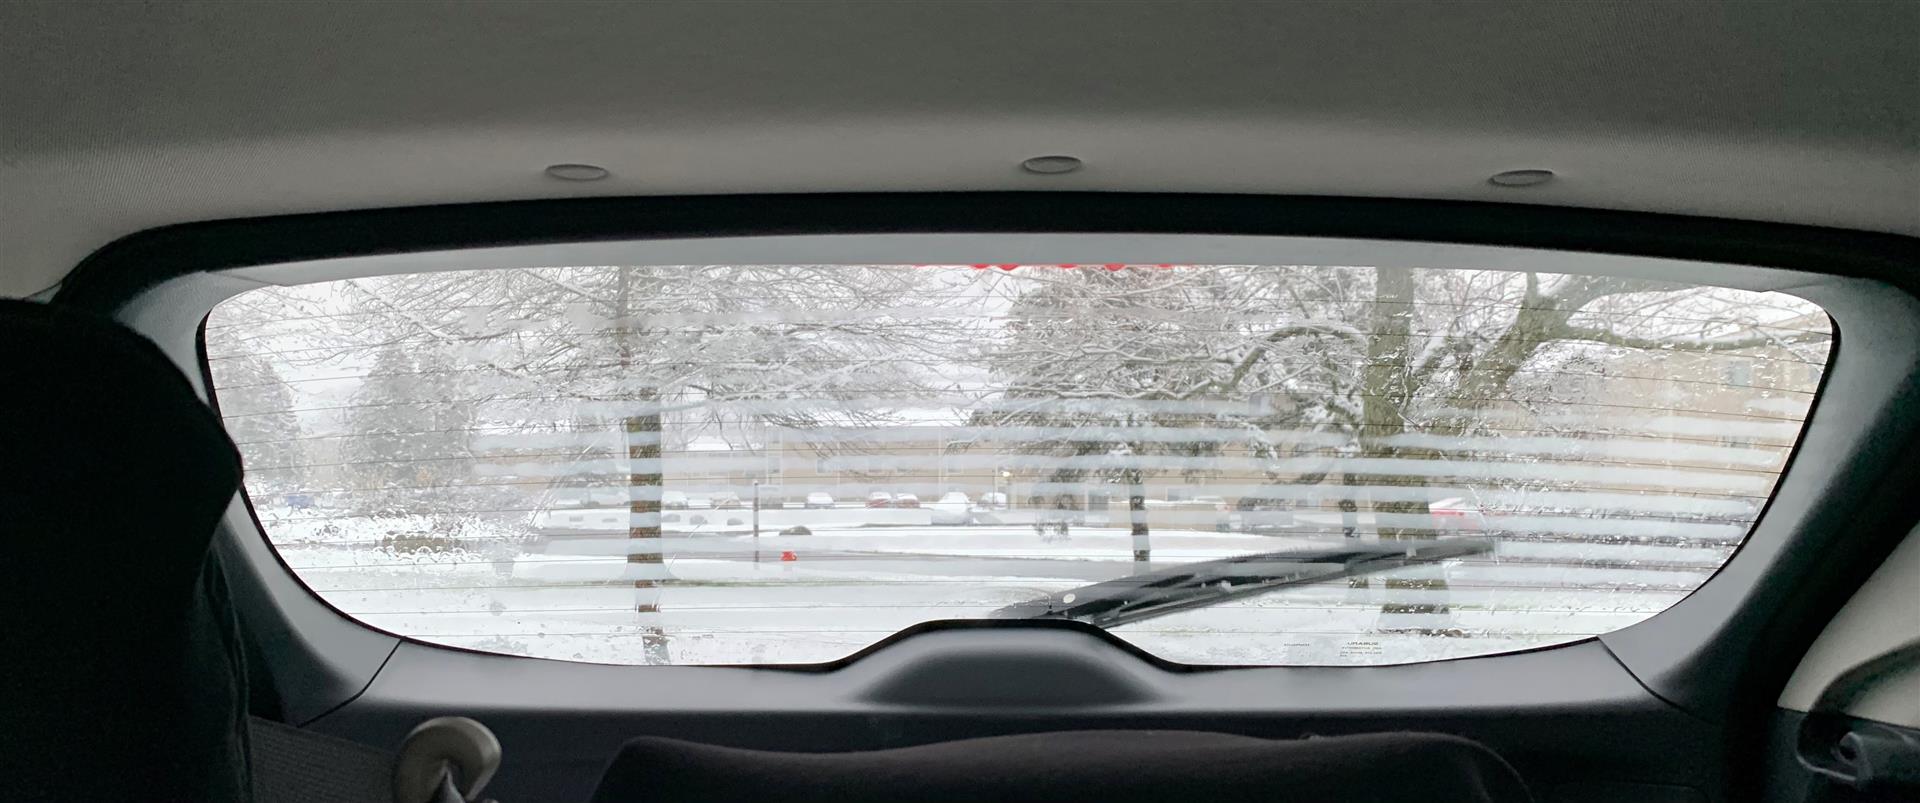 Why Won't My Rear Defroster Work? - Lou's Car Care & Fleet Services